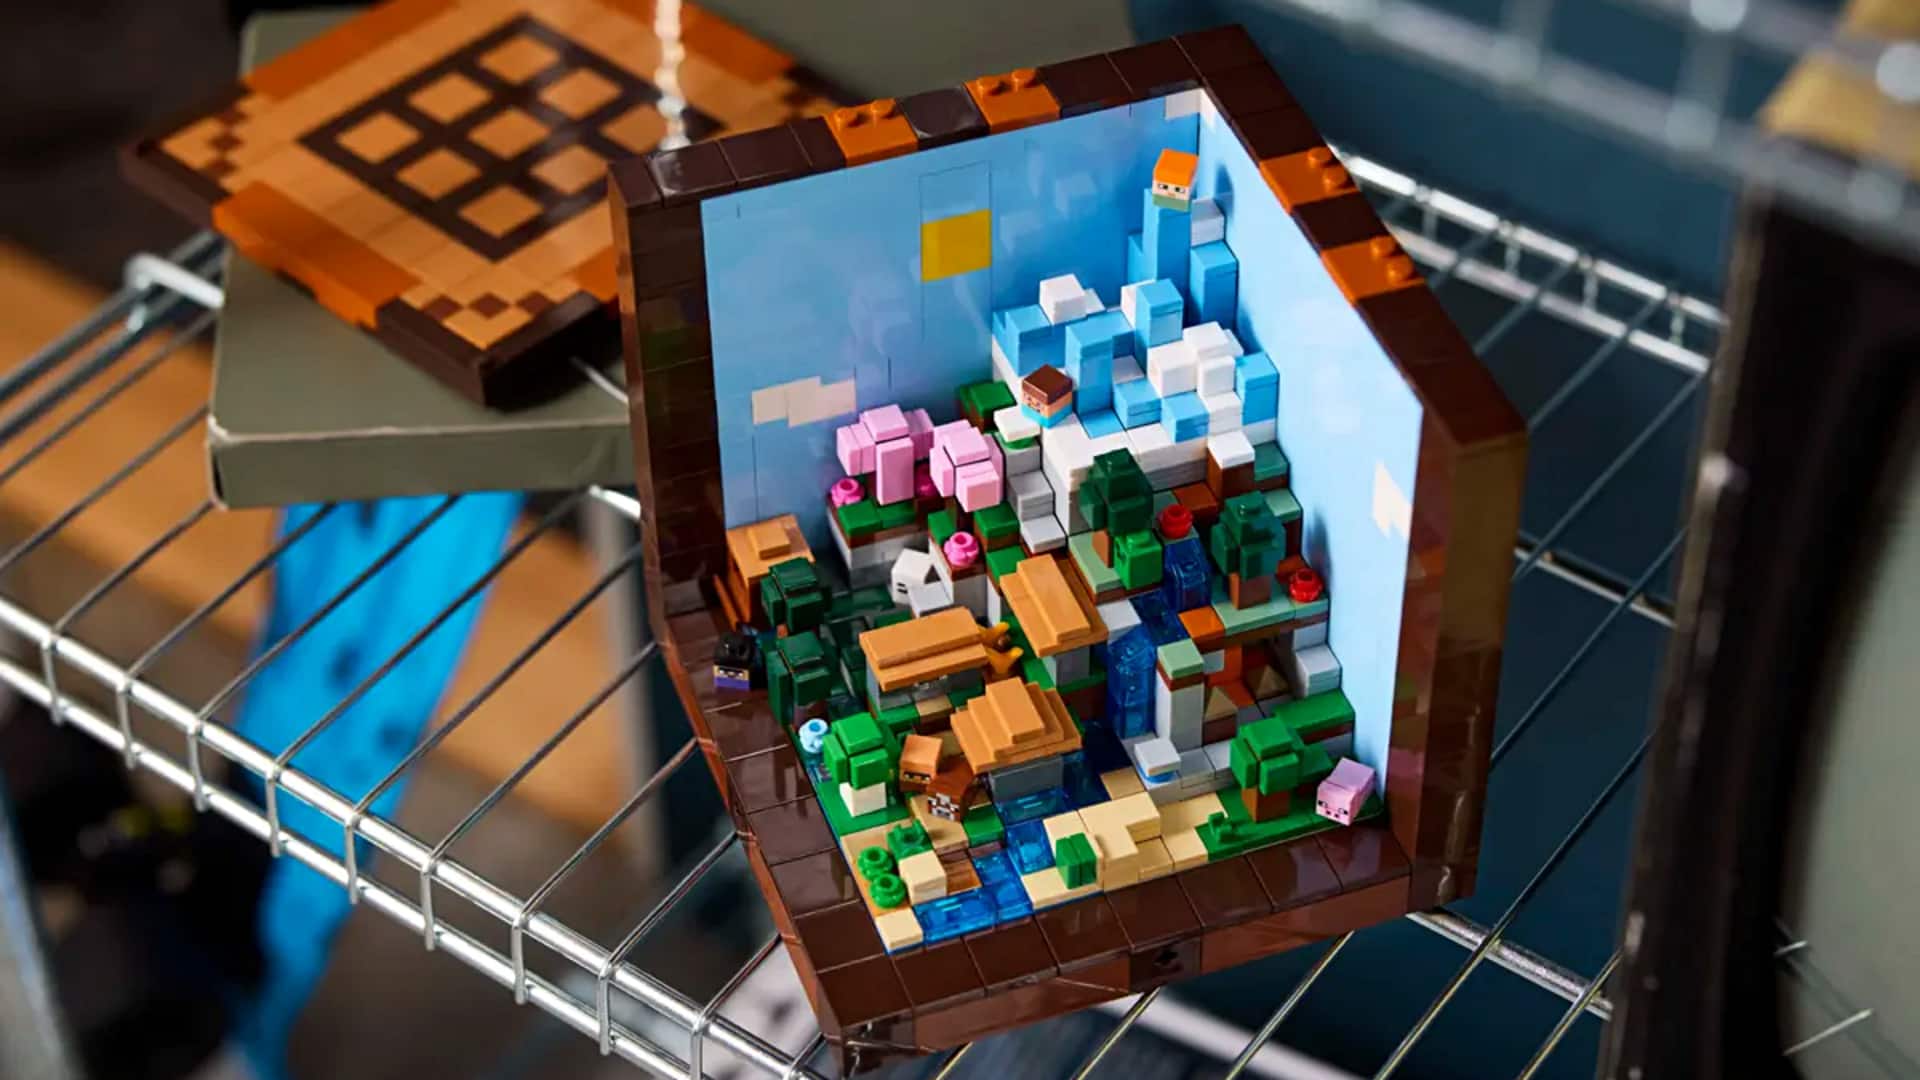 'The Crafting Table': Meet Lego's first Minecraft set for adults